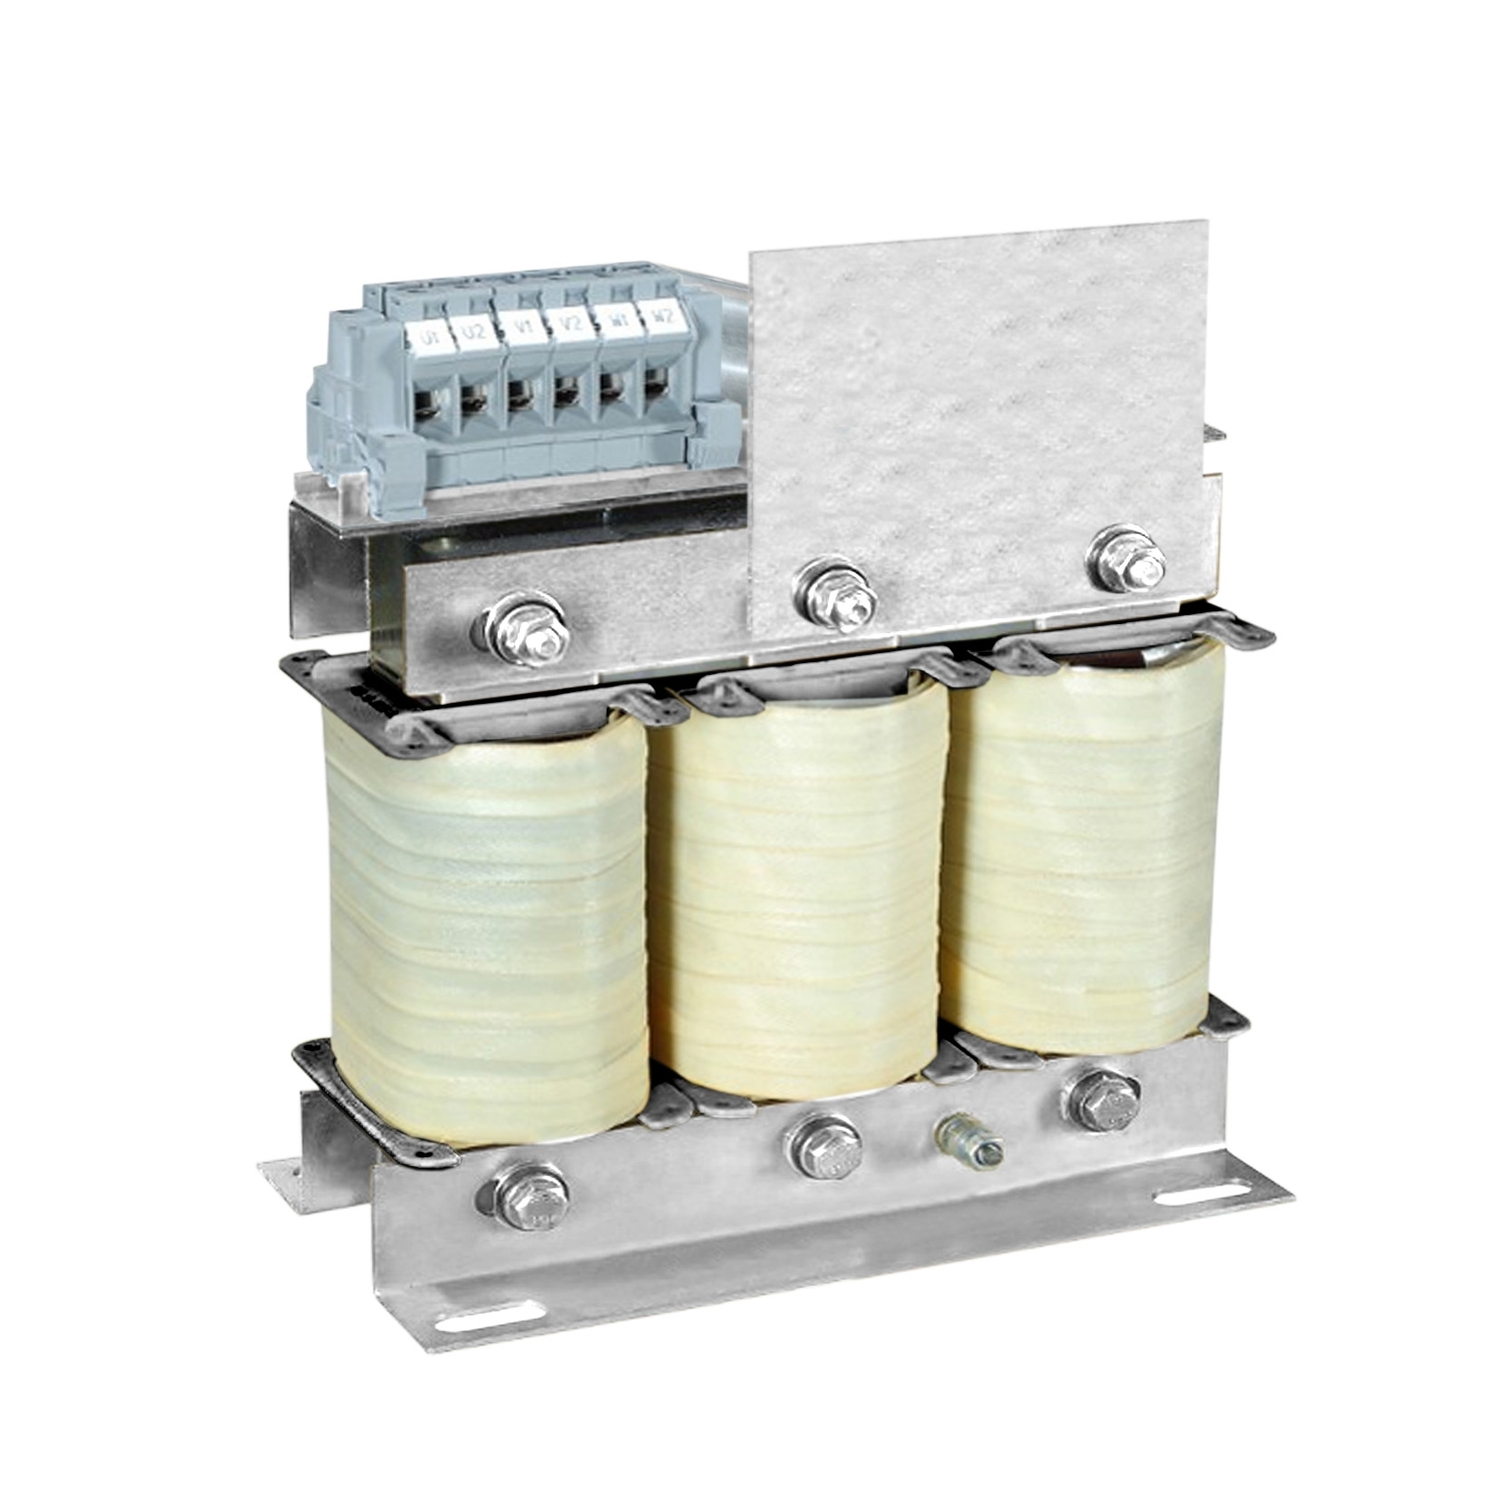 sinus filter - 400 A - for Altivar variable speed drive